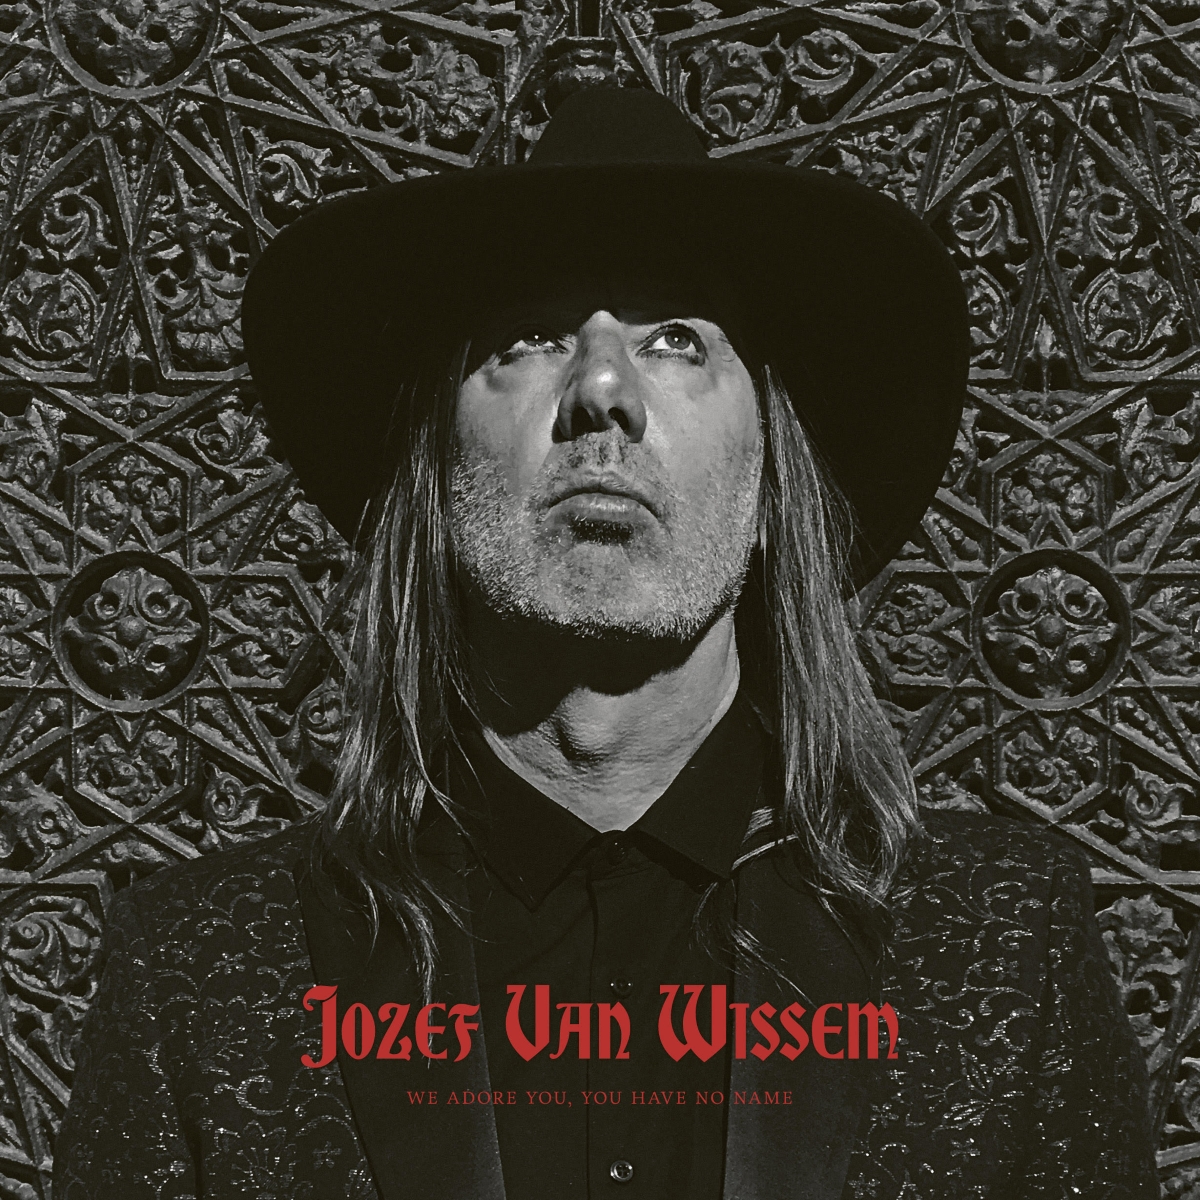 Premiere: Jozef van Wissem shares new song 'Bow Down' & presents new album at LGW18